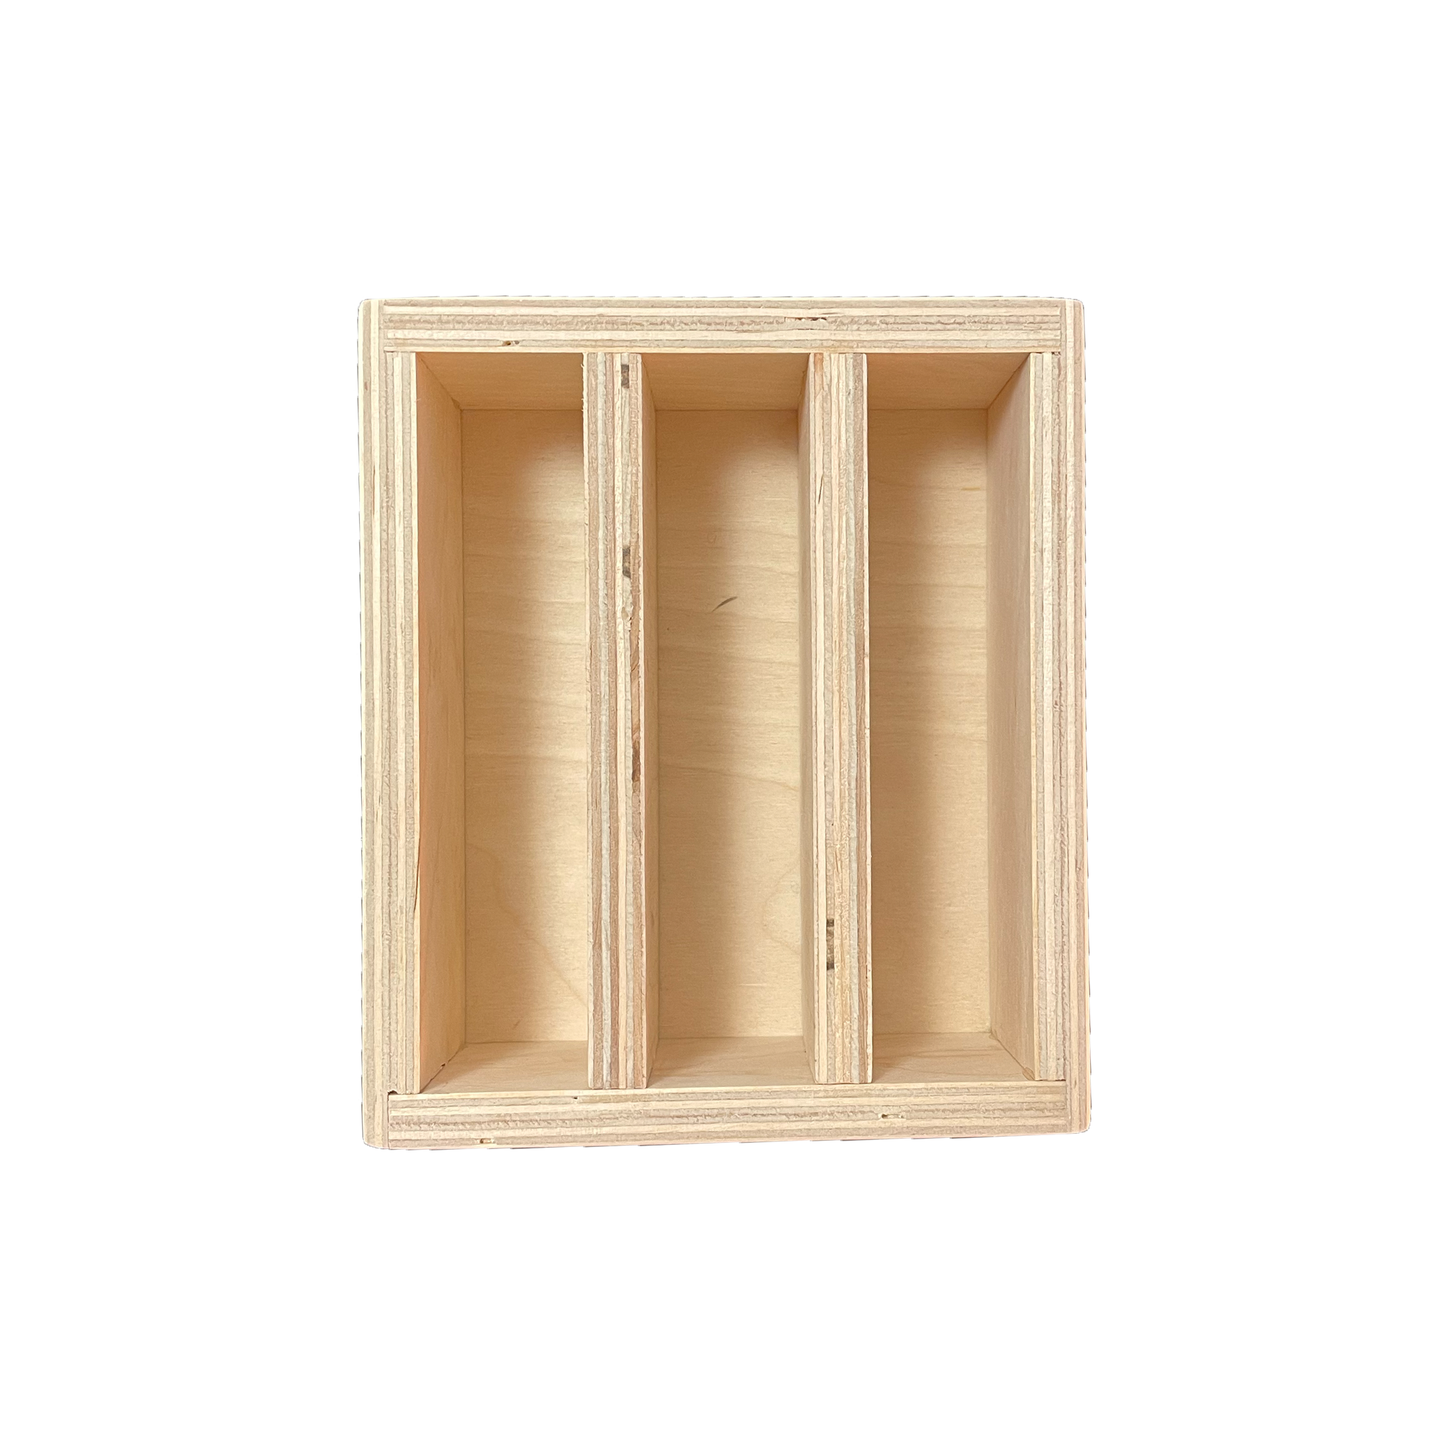 Wooden box - 3 aligned compartments